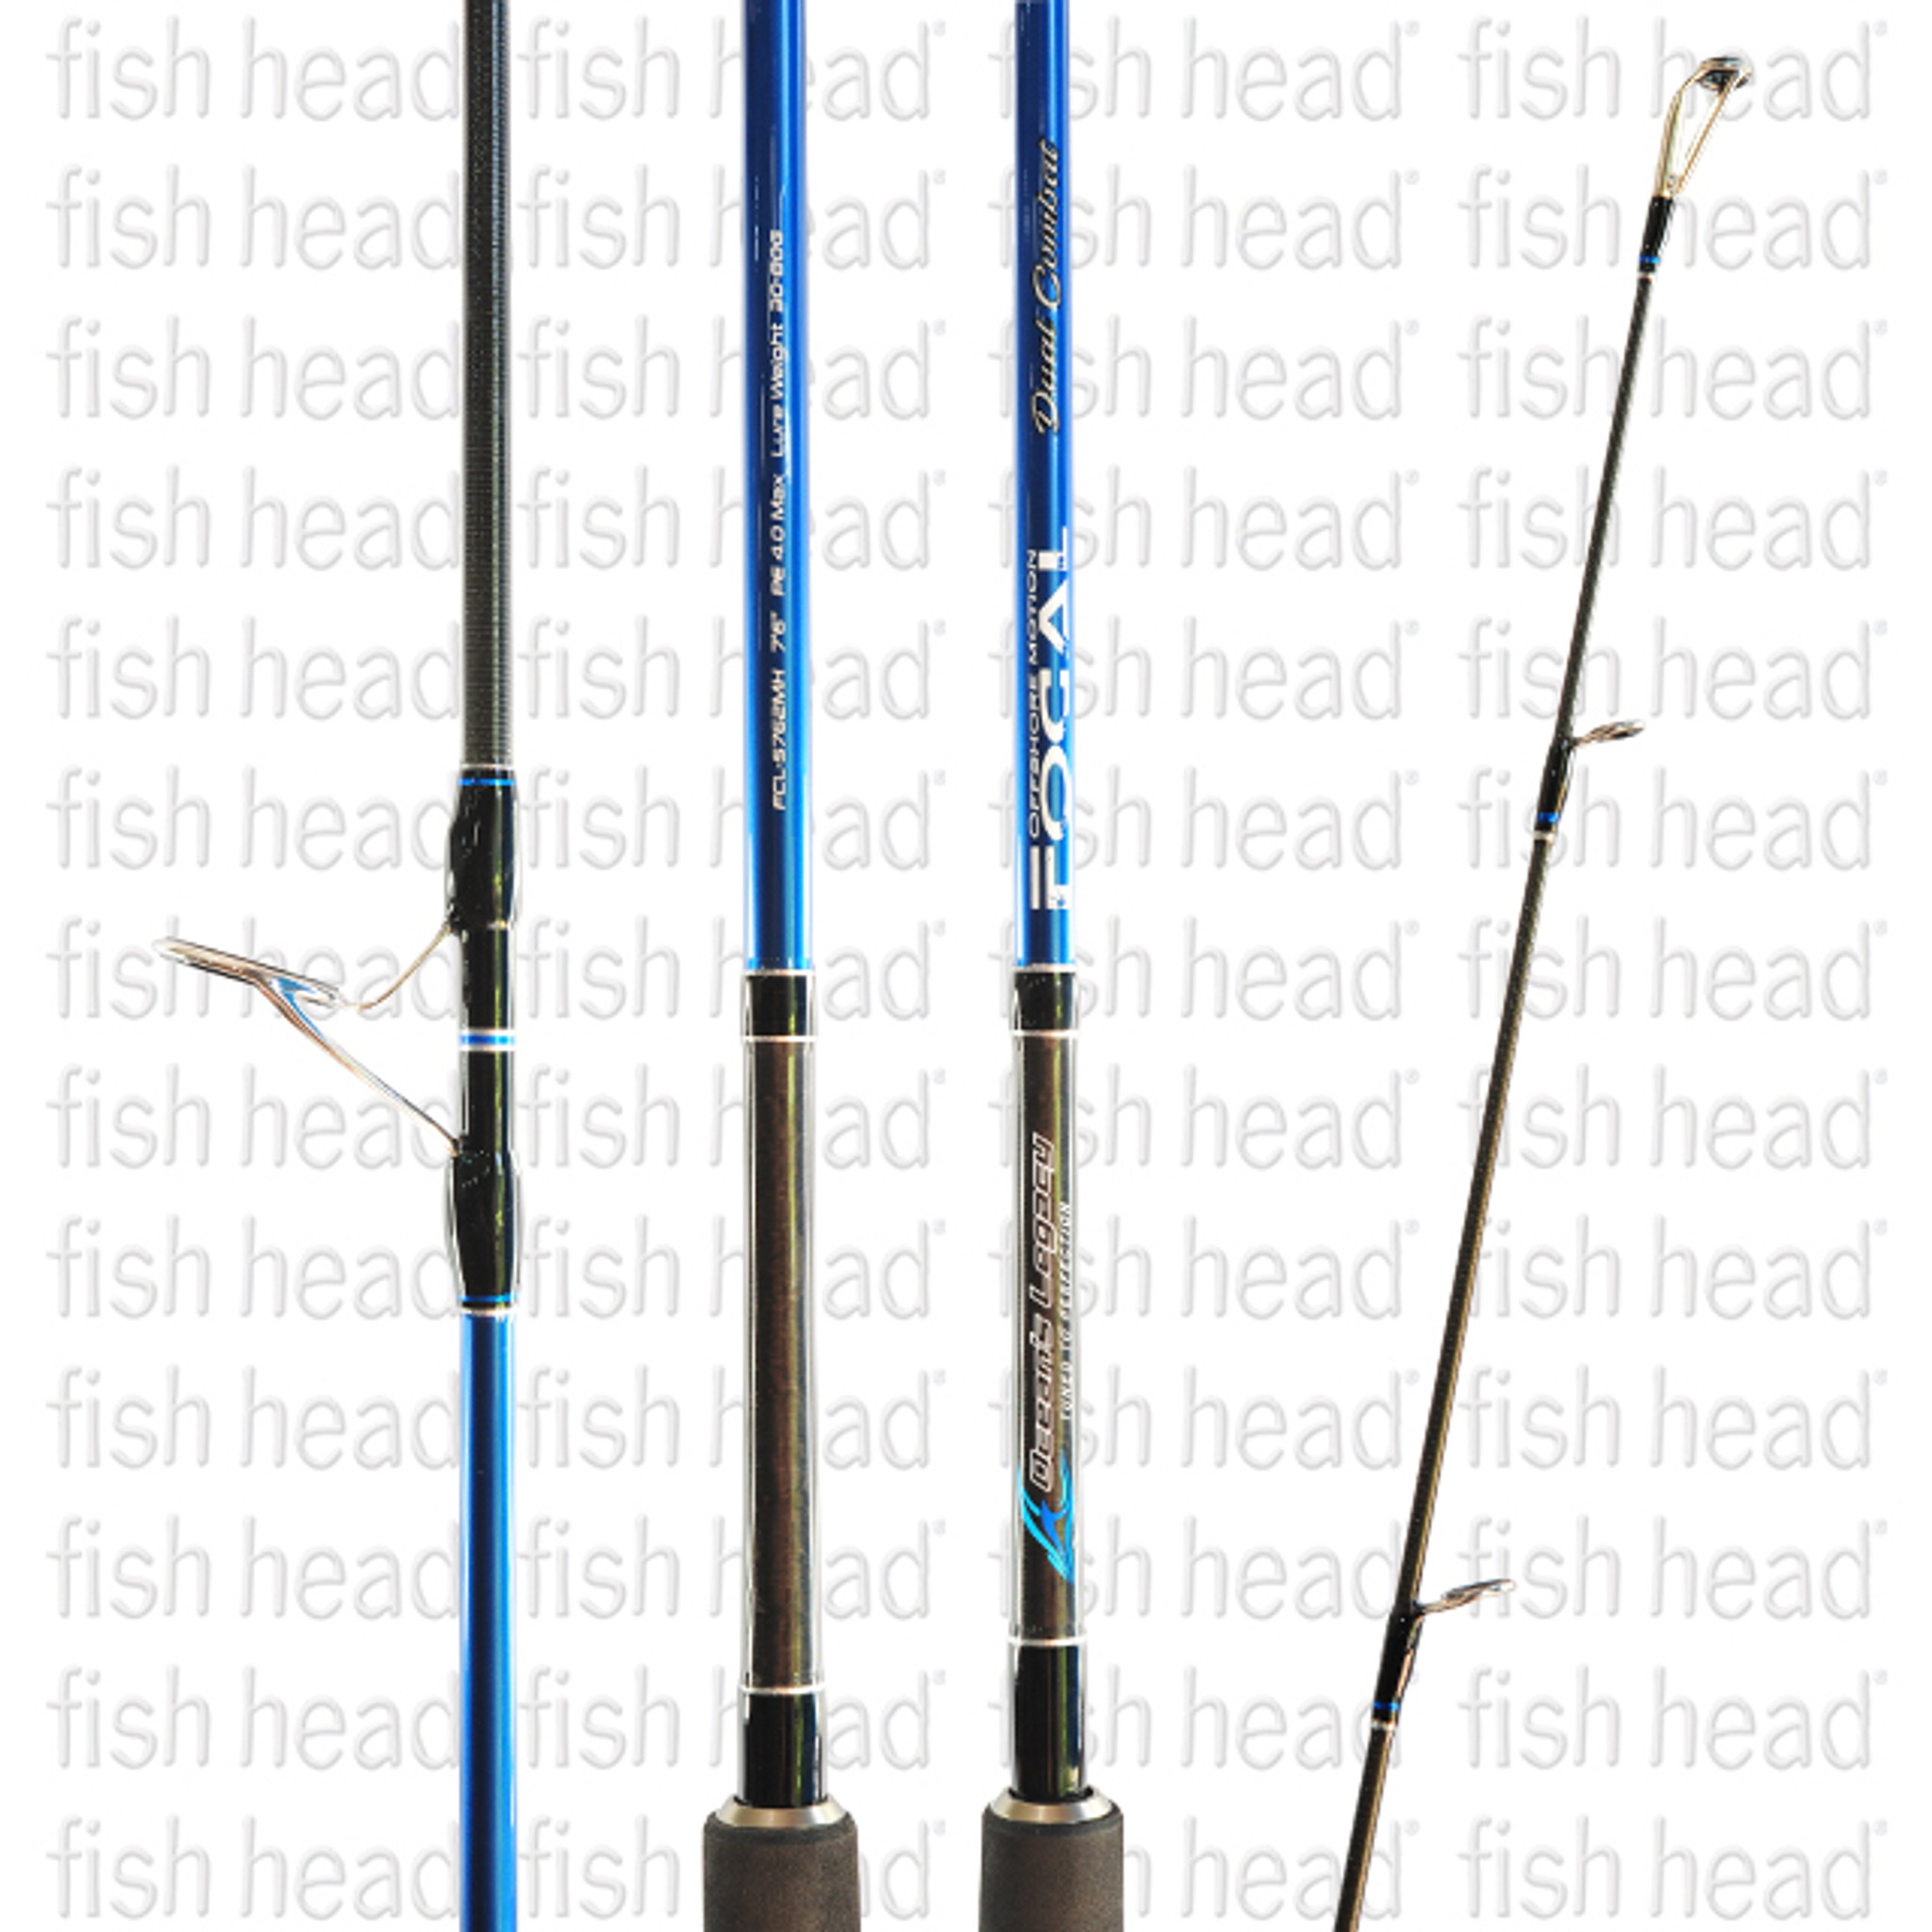 Oceans Legacy Focal Spin Series Spinning Rods